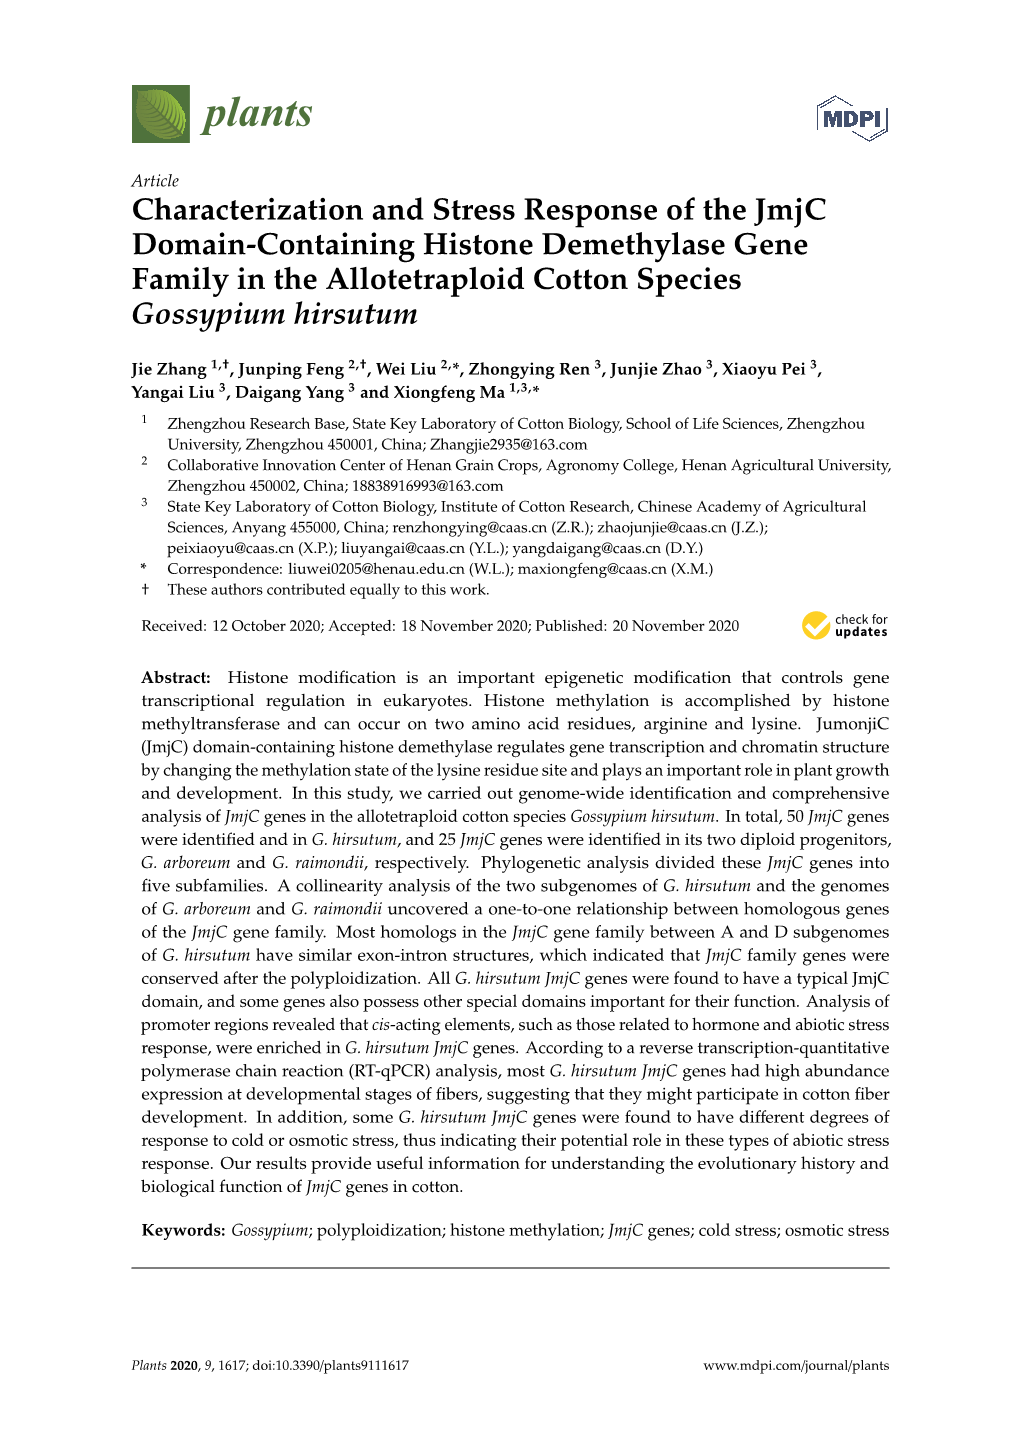 Characterization and Stress Response of the Jmjc Domain-Containing Histone Demethylase Gene Family in the Allotetraploid Cotton Species Gossypium Hirsutum